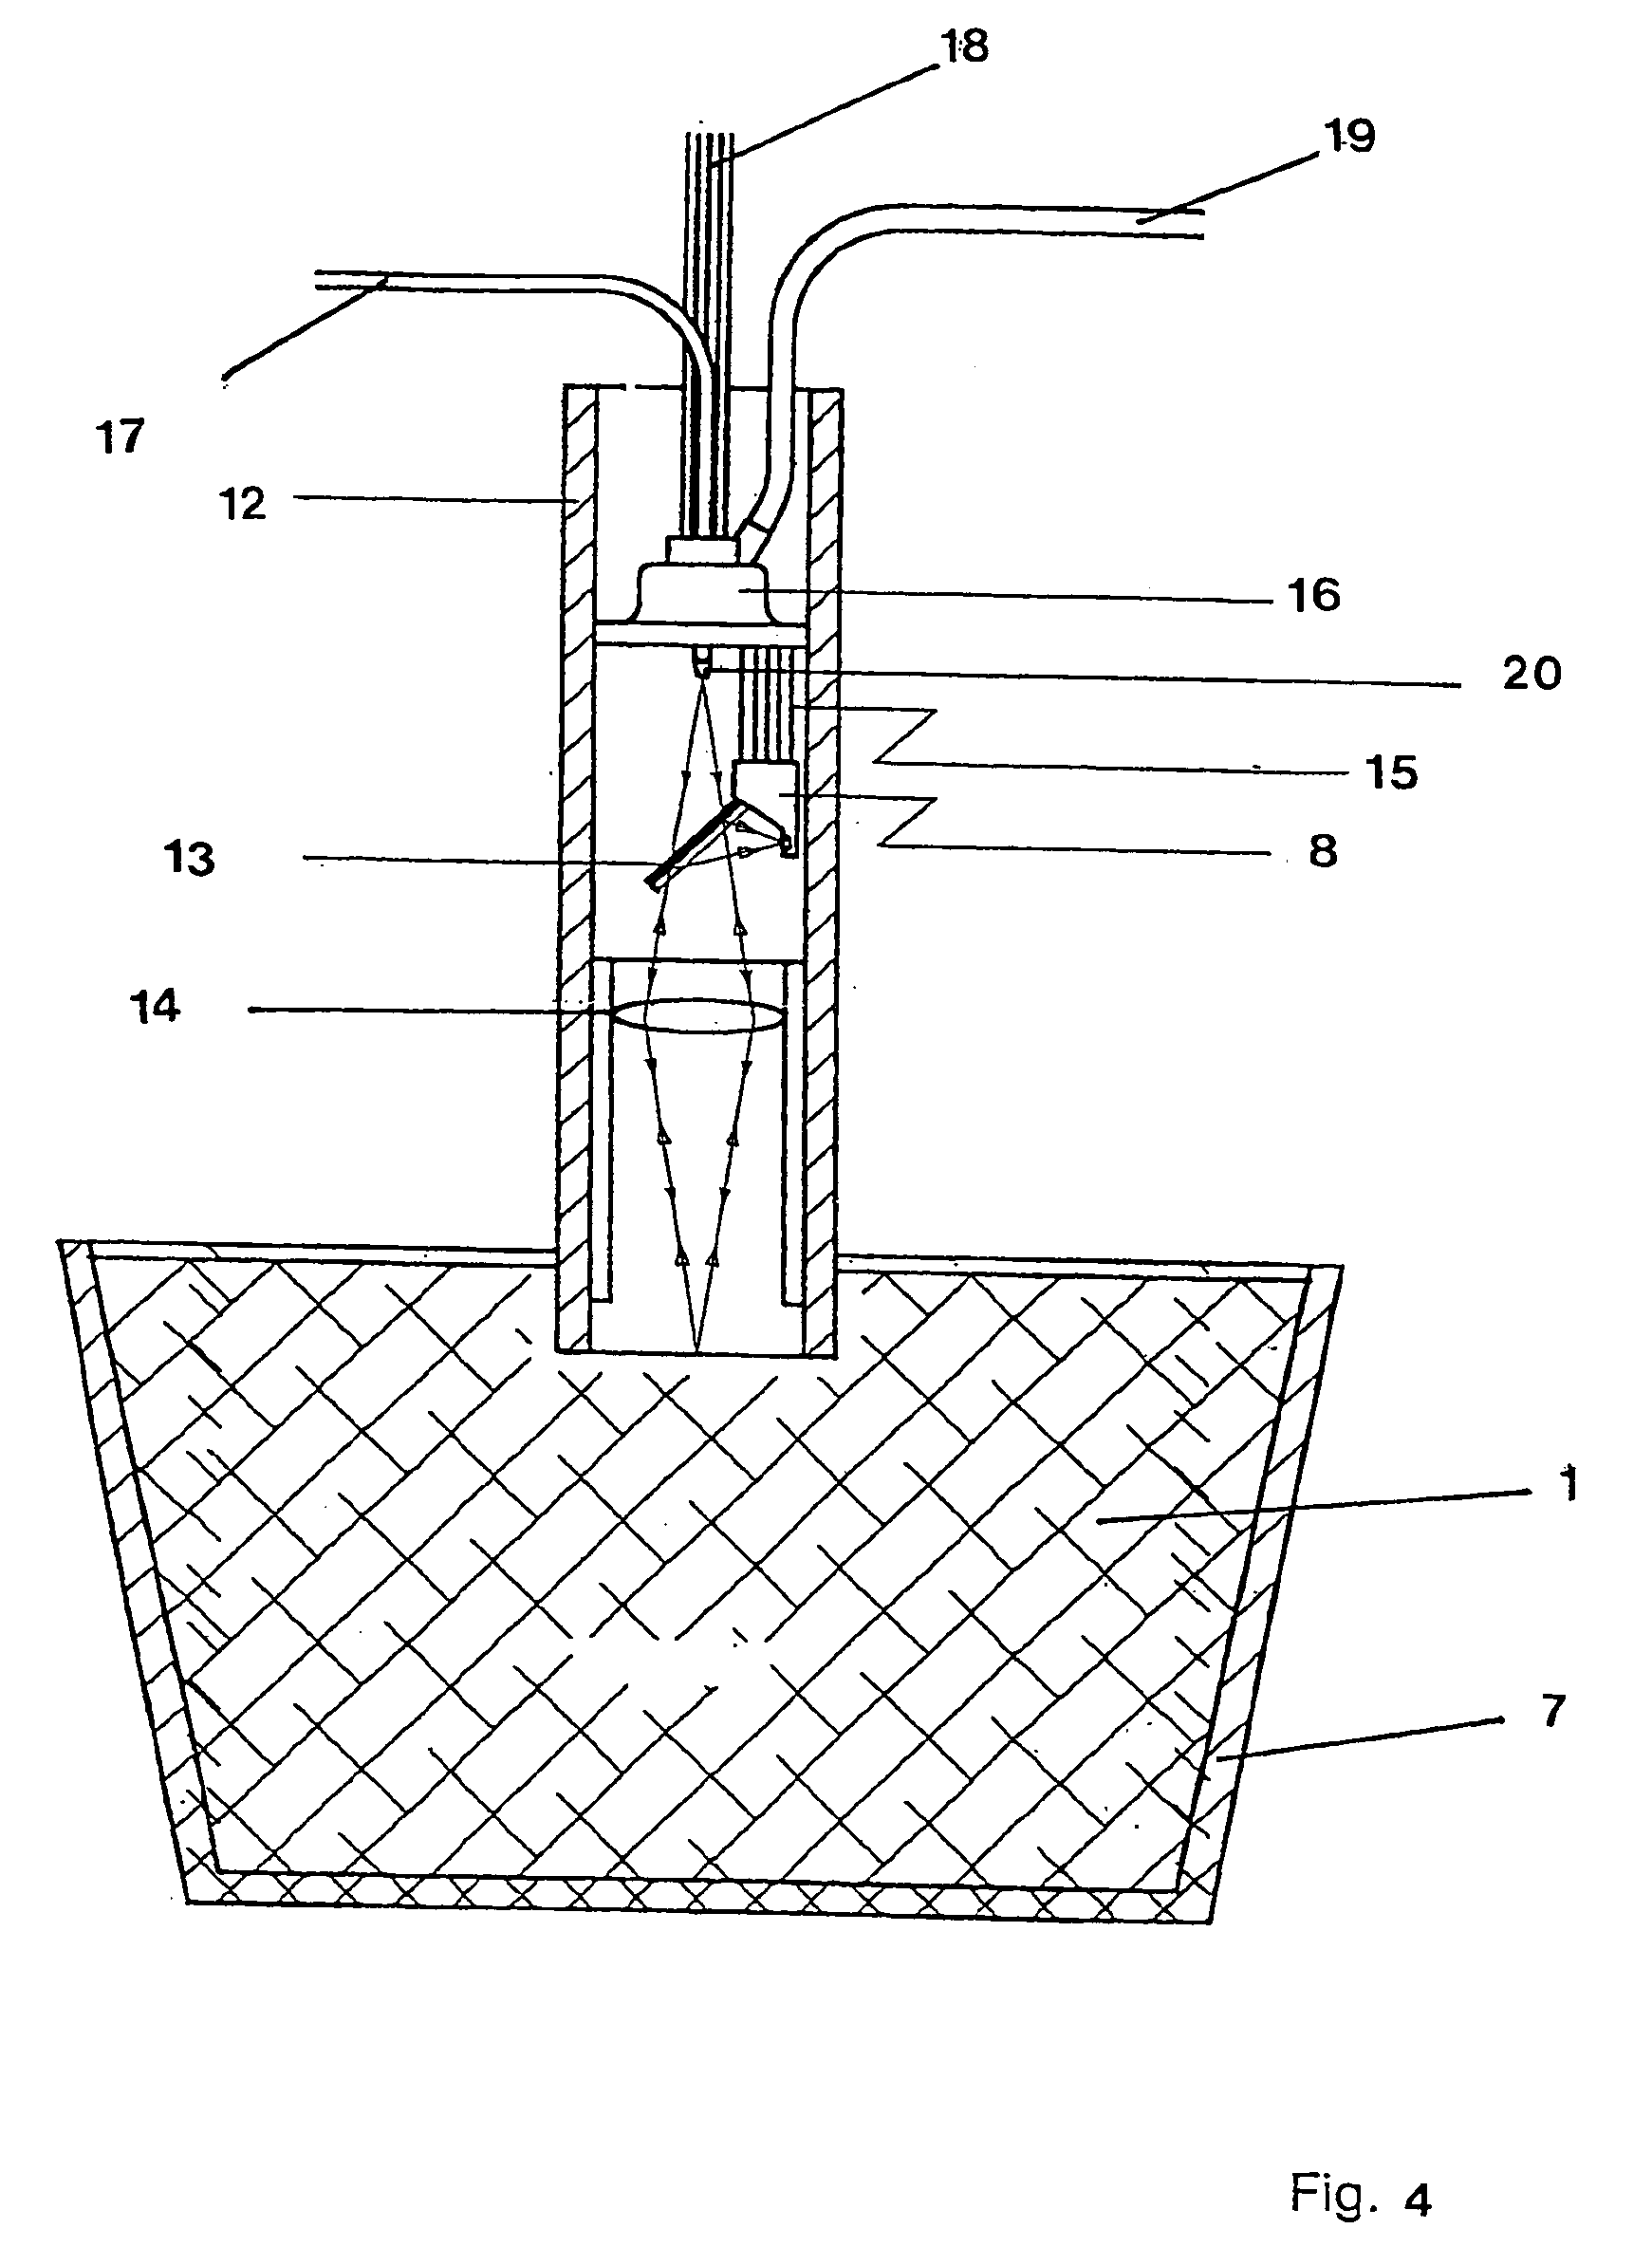 Method for analysis of a molten material, device and immersion sensor